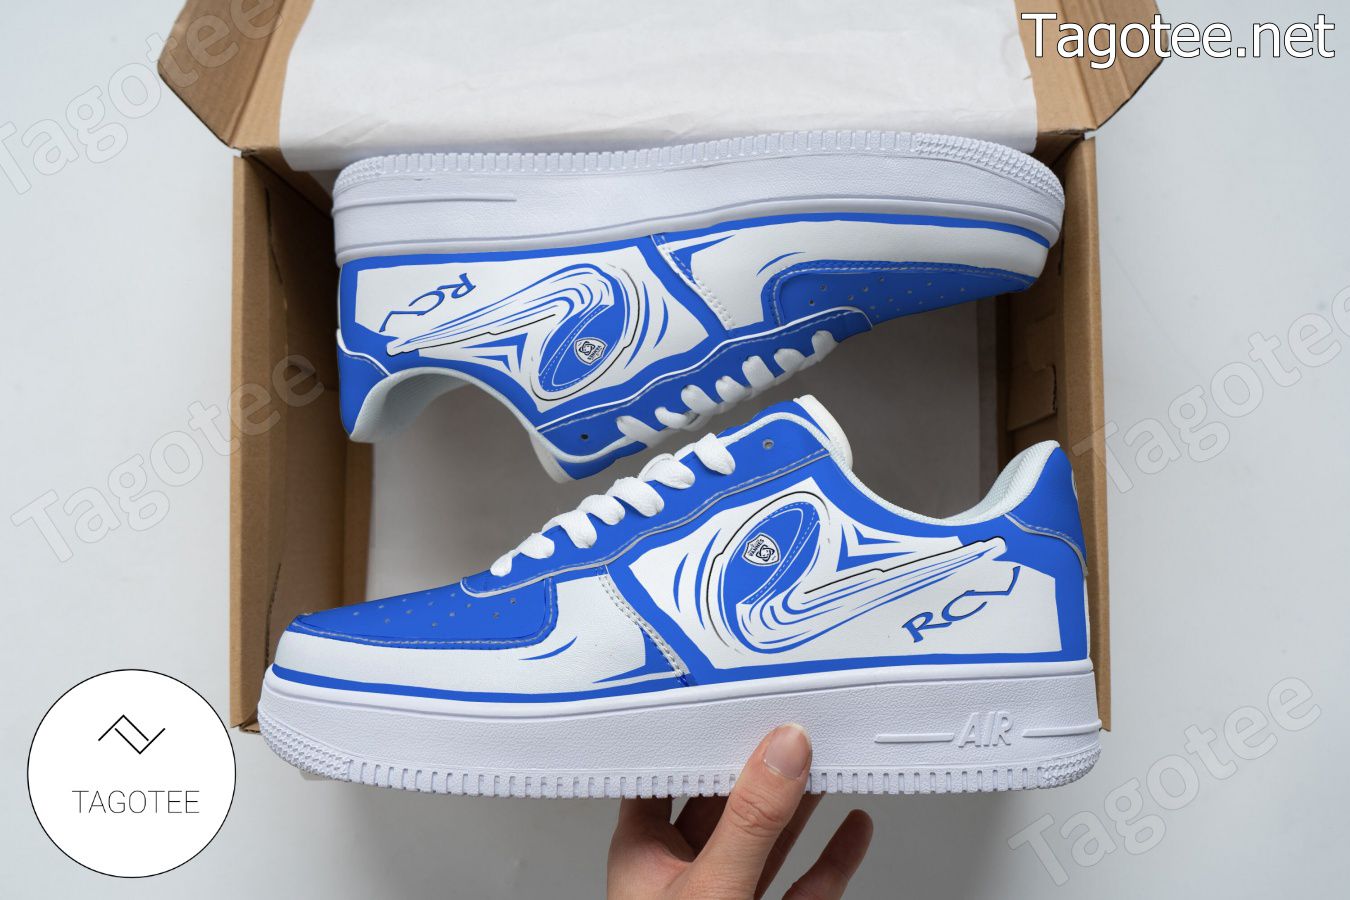 Rugby Club Vannes Logo Air Force 1 Shoes a